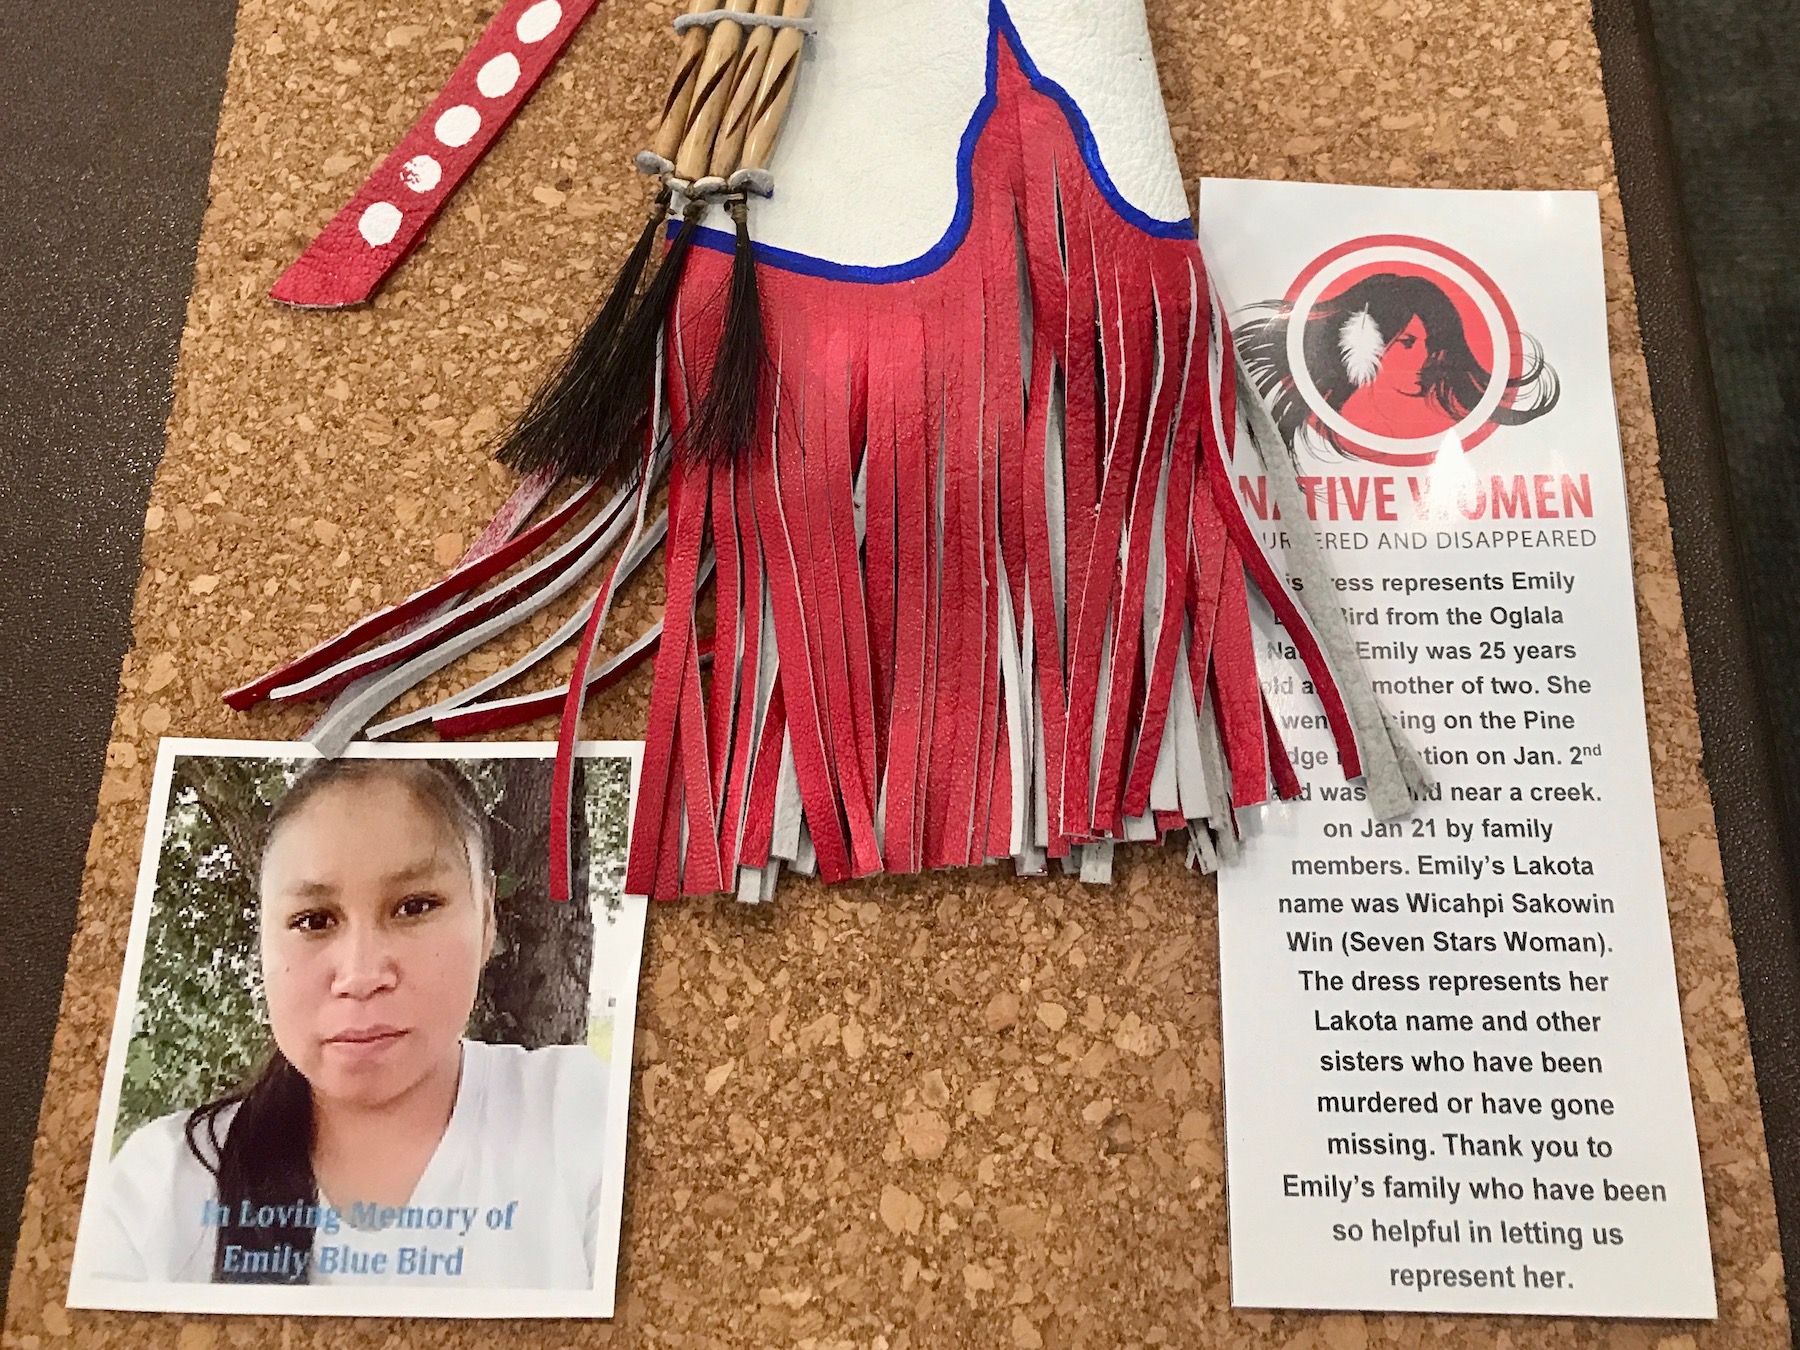 Native women push for more action on missing and murdered sisters